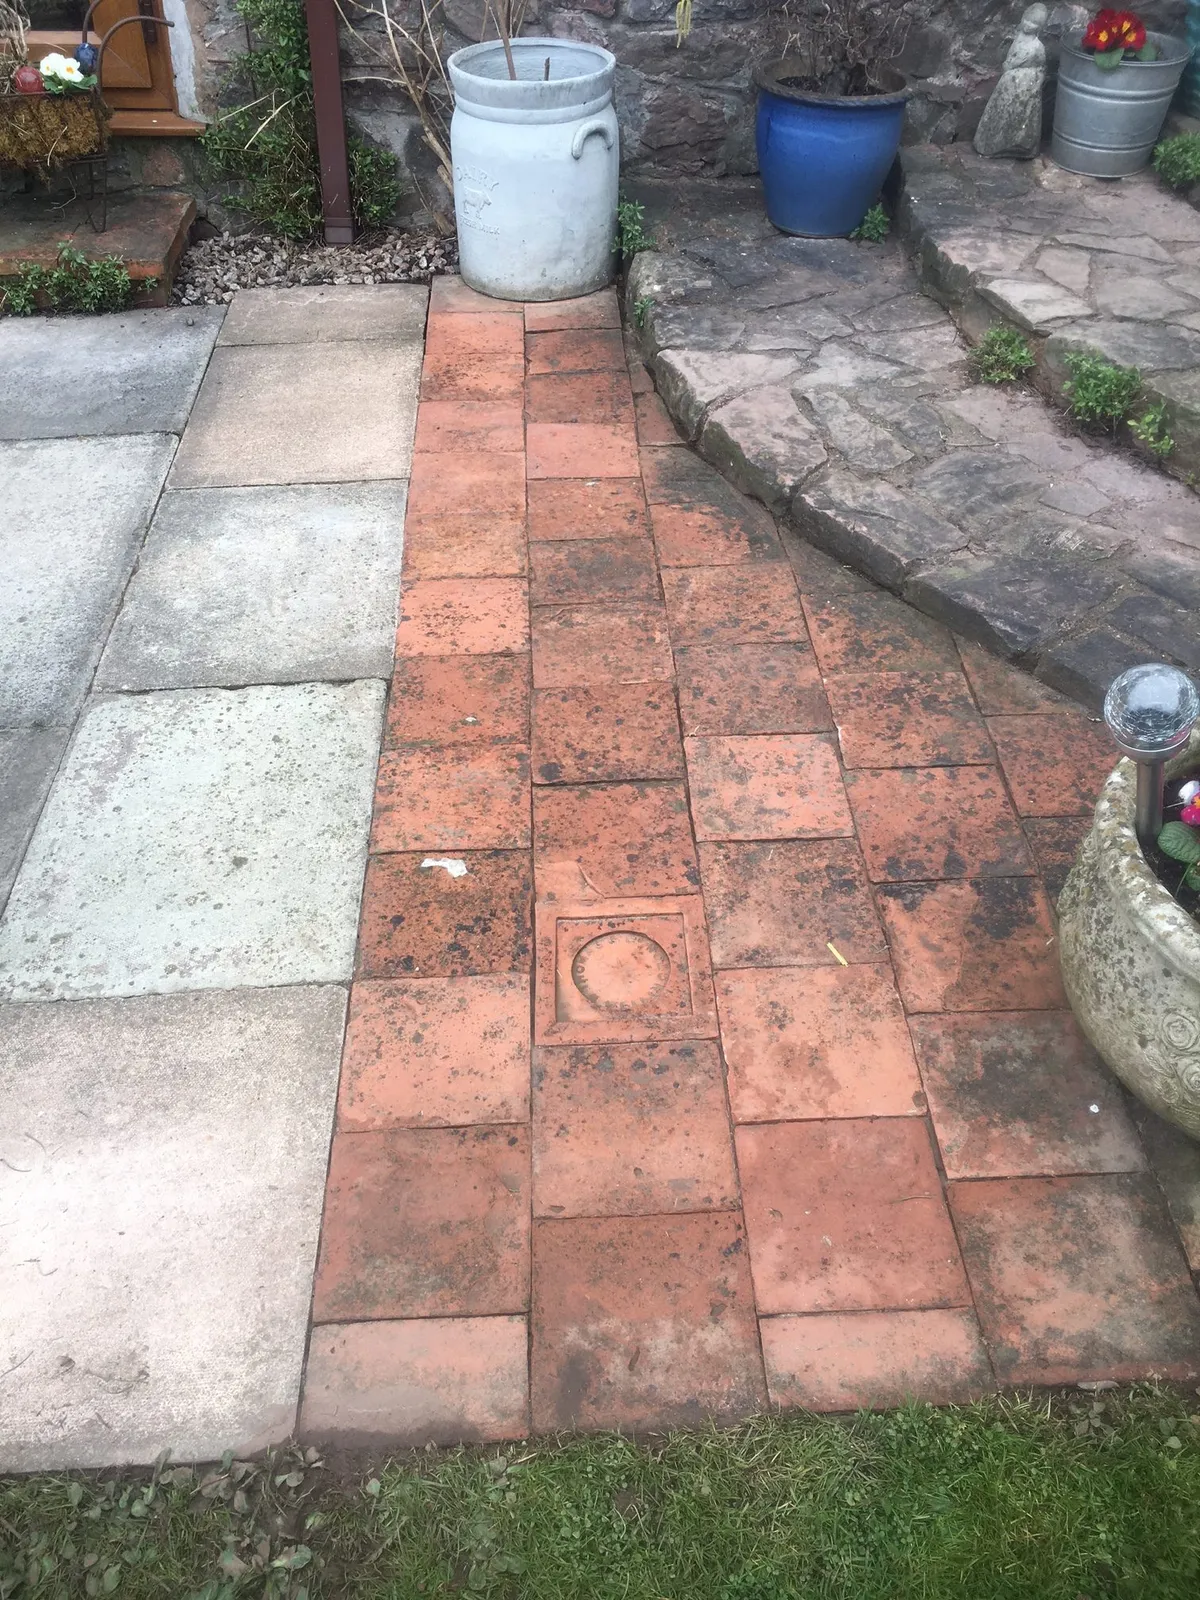 HG patio-tile cleaner